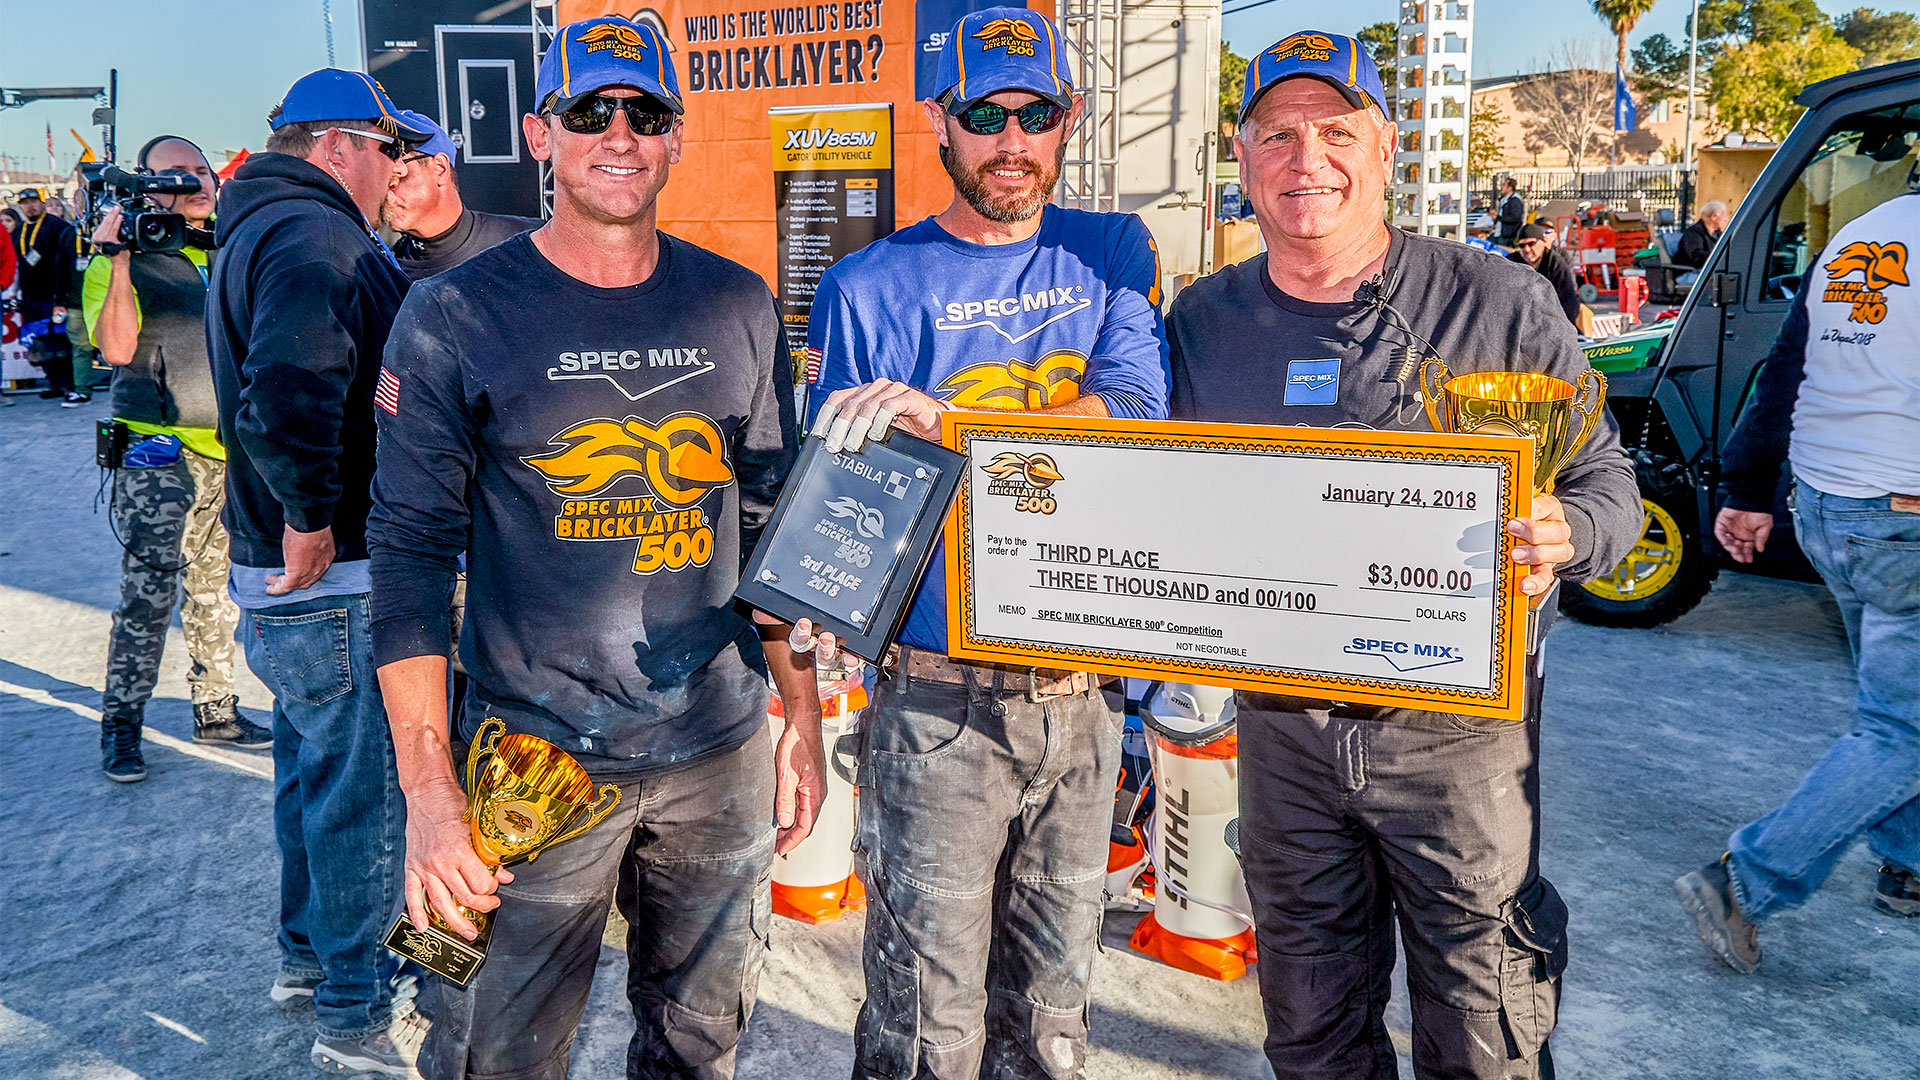 2017 World Champion, Matt Cash (middle), took third place with 658 brick laid. His mason tender Chet Huntley (left) was also returning to defend his Toughest Tender® title from 2017.